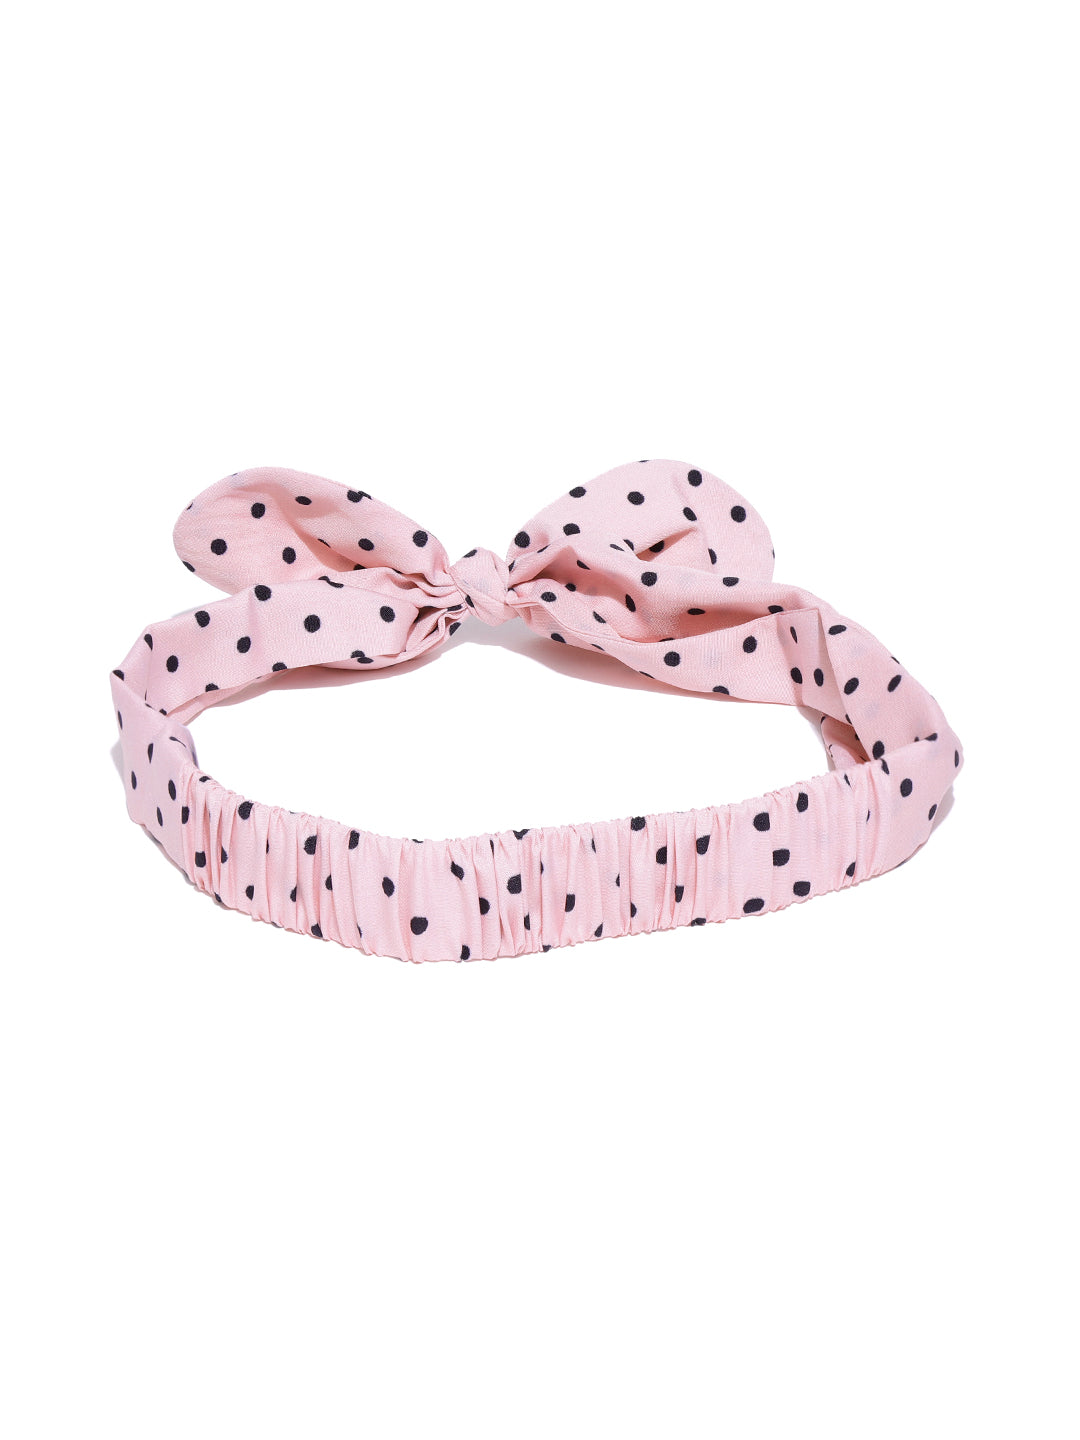 Blueberry black dotted pink bunny ear shape hair band